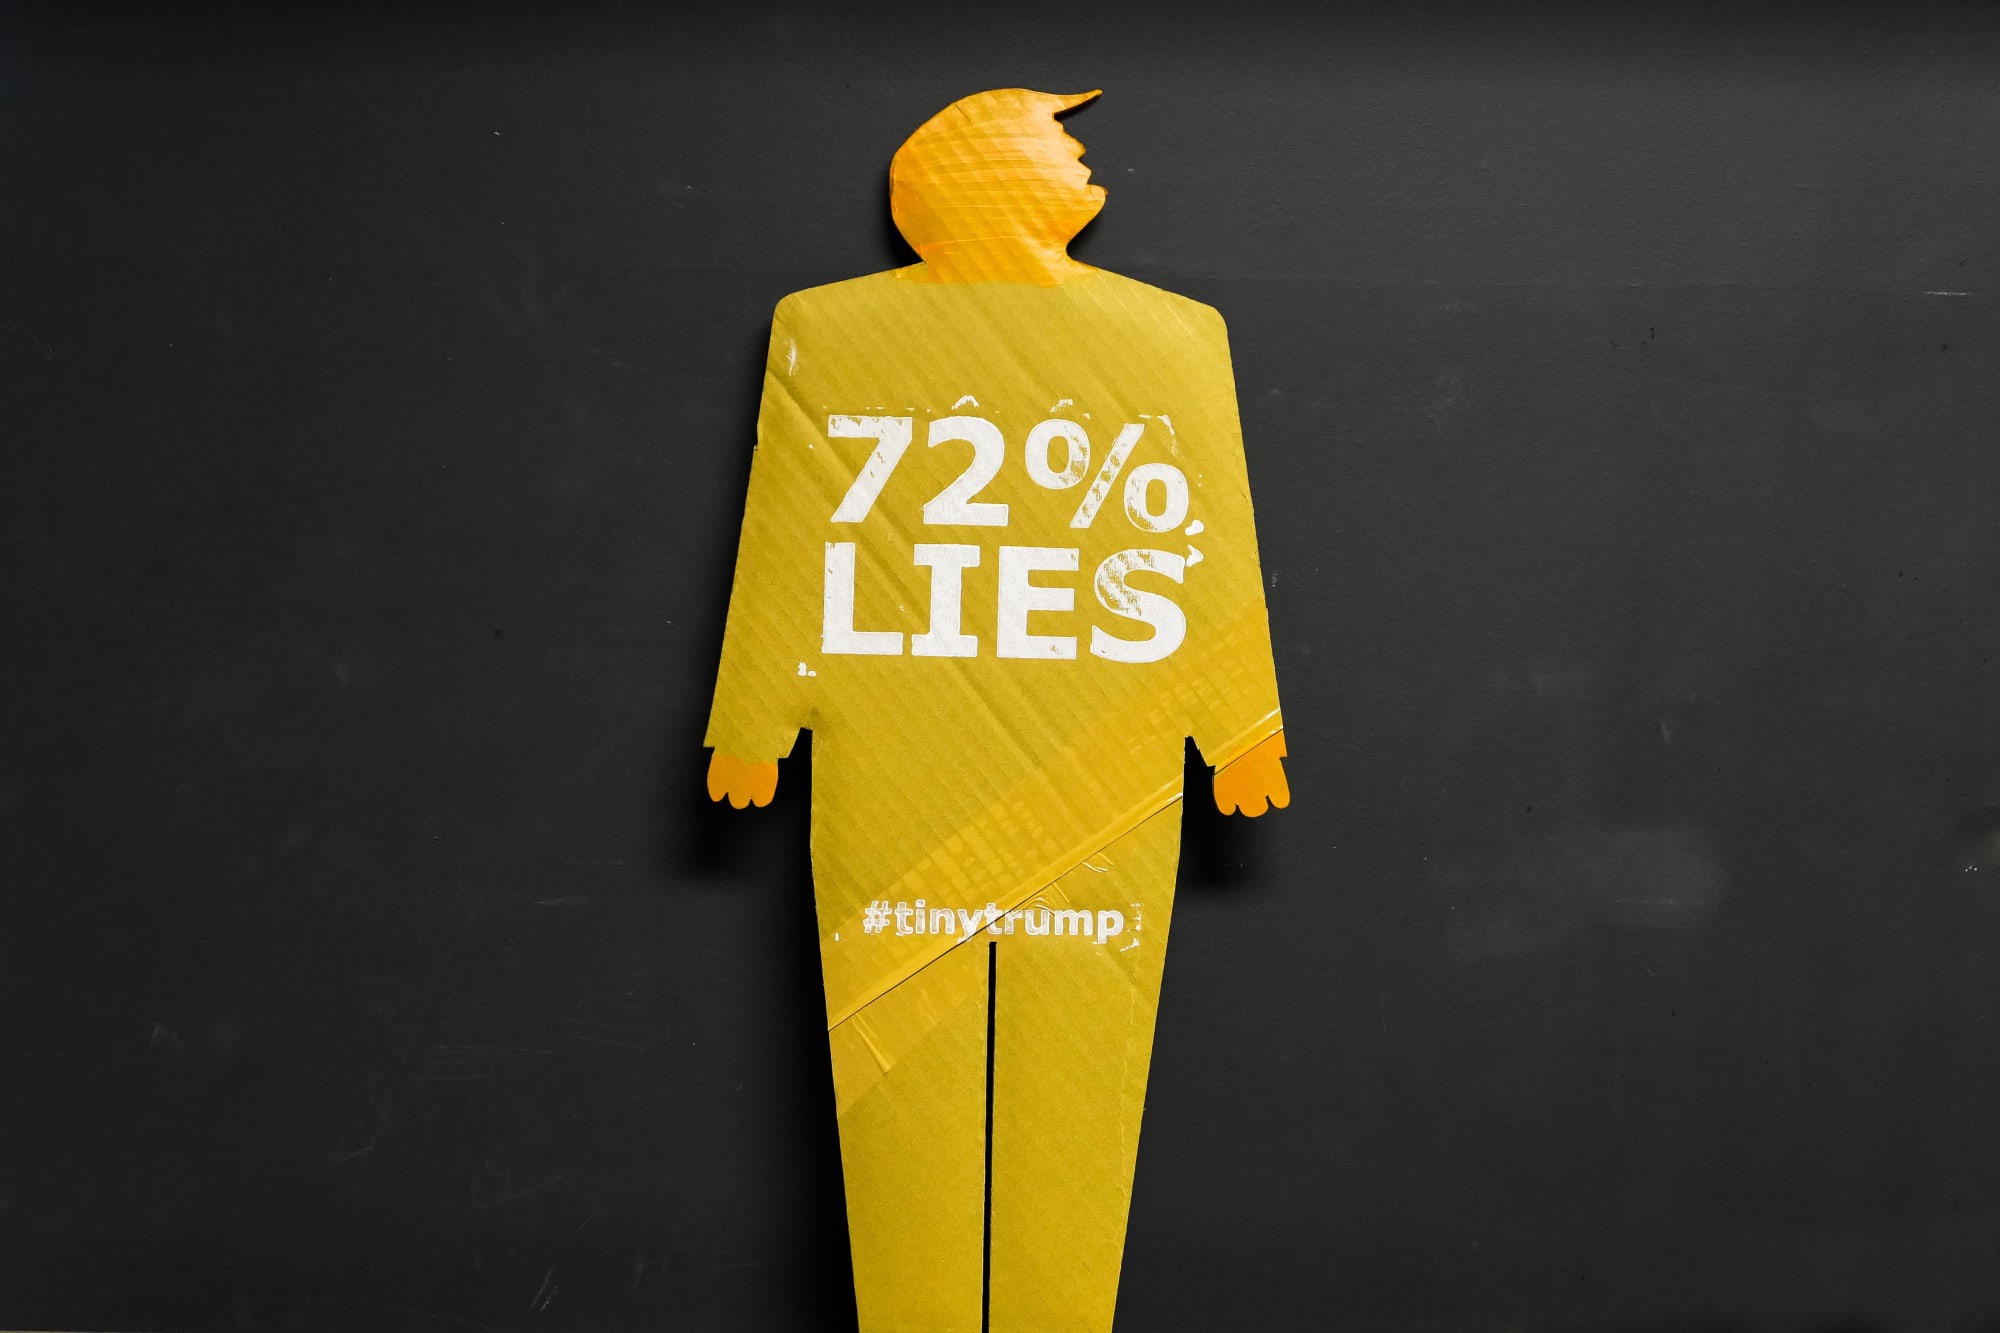 Small thumbnail image of Same as previous image except the slogan is 72% Lies.